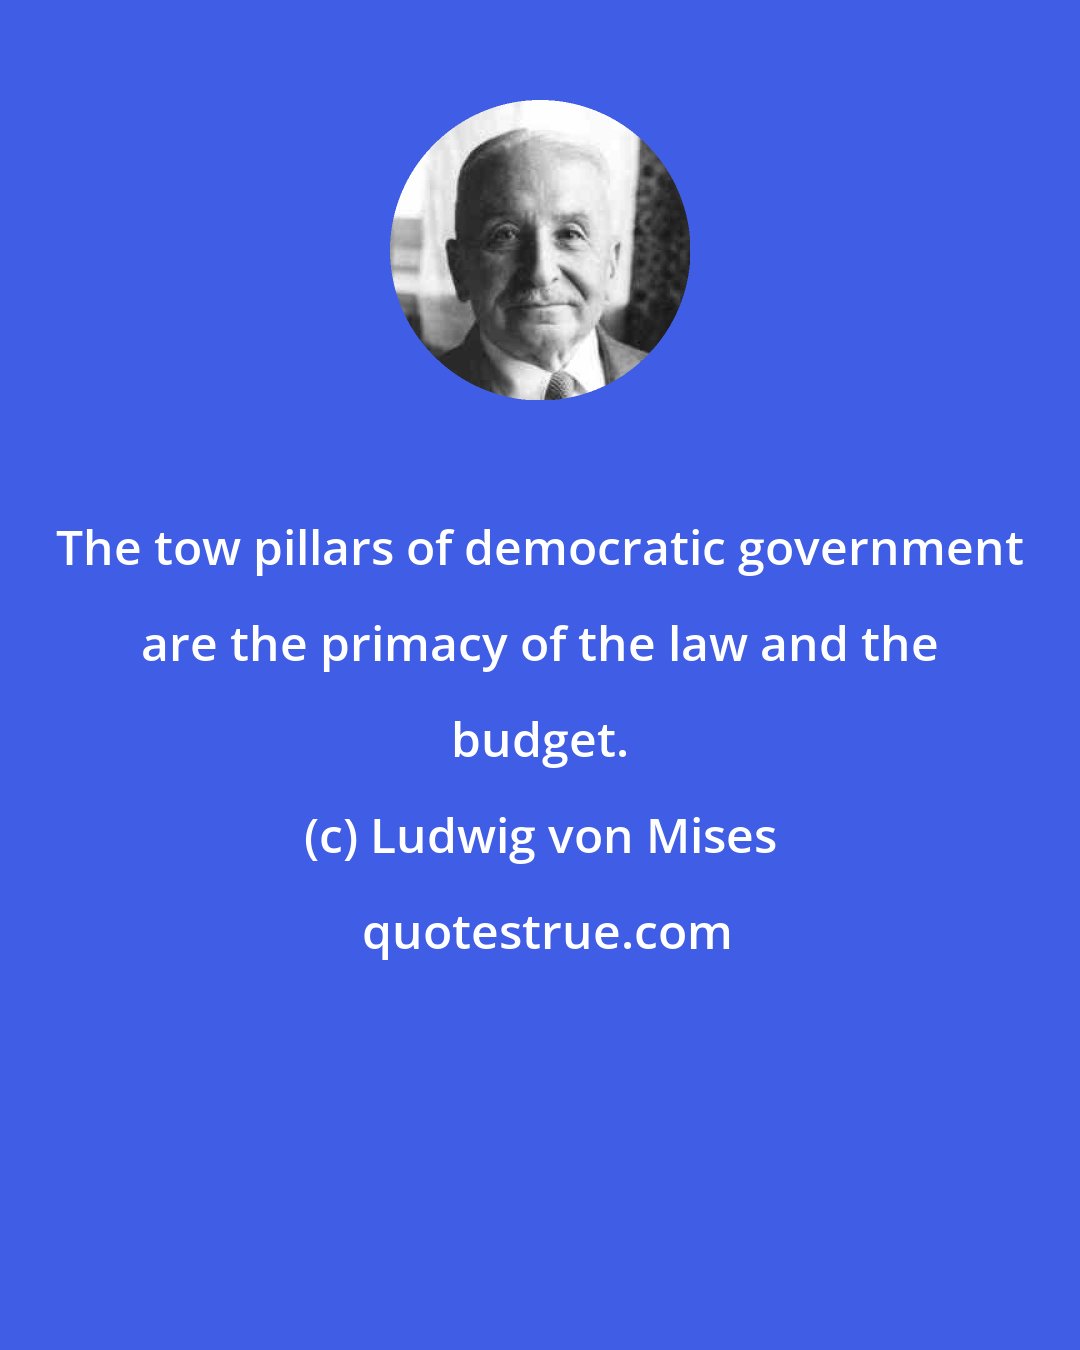 Ludwig von Mises: The tow pillars of democratic government are the primacy of the law and the budget.